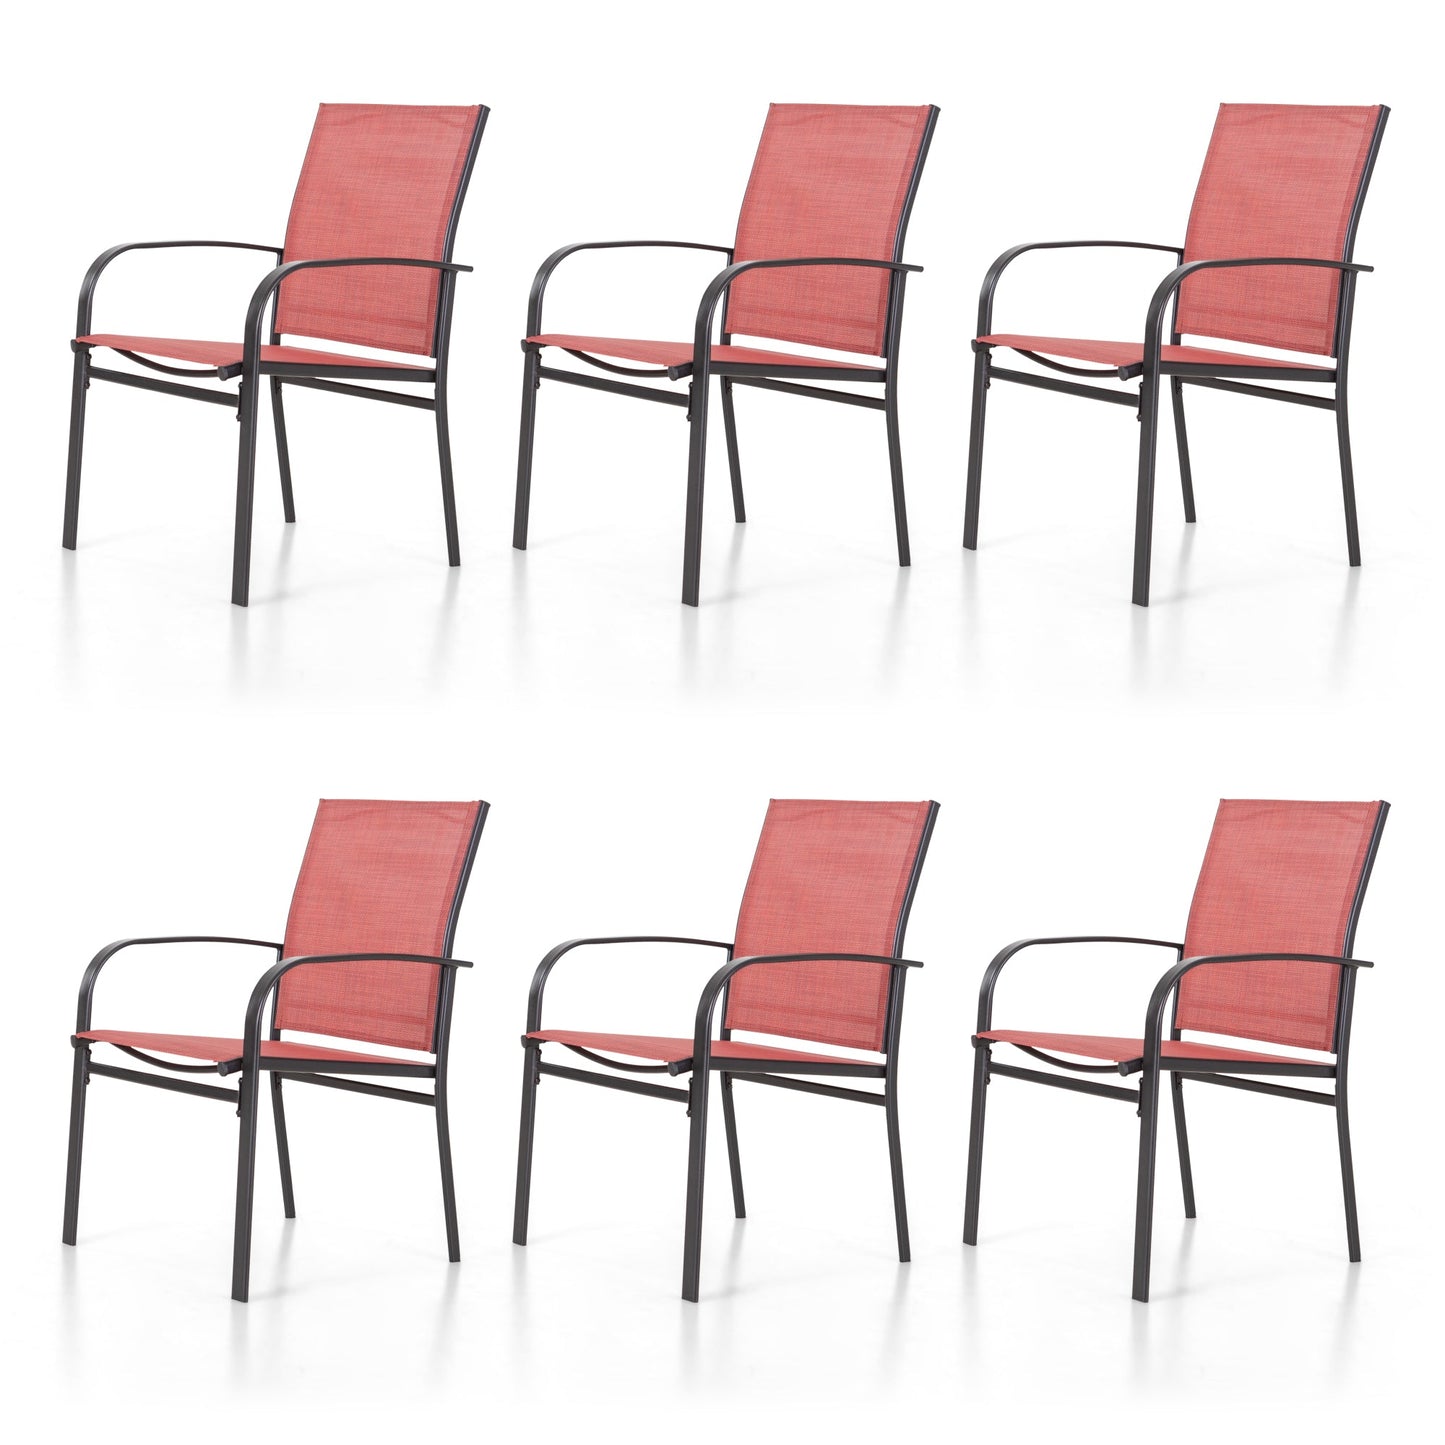 Sophia & William Outdoor Patio Dining Chair - Textilene - Set of 6 - Red